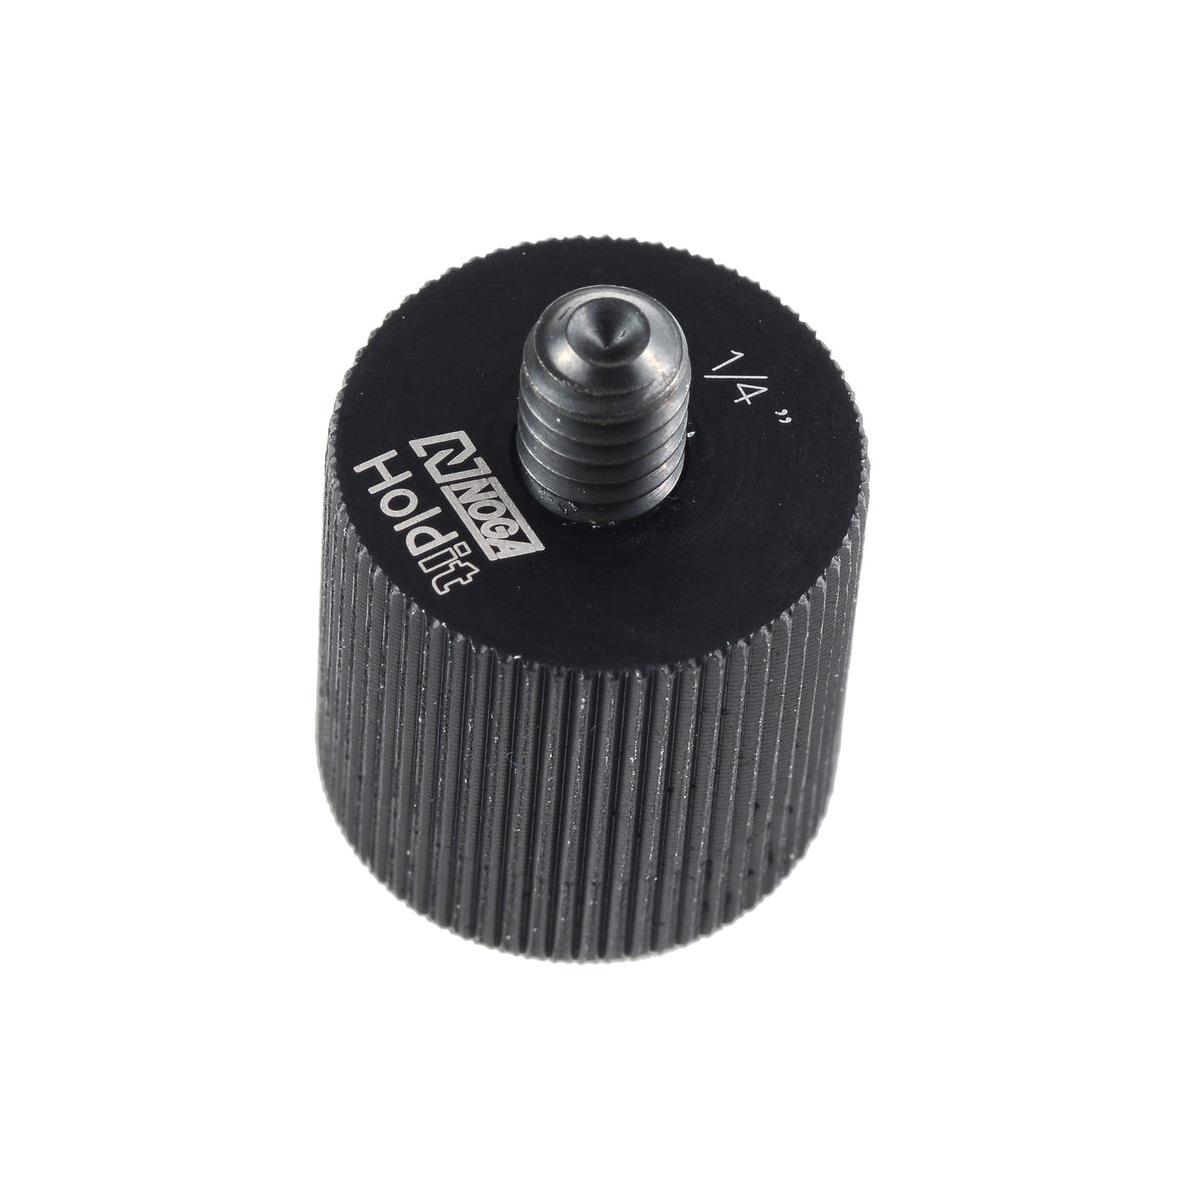 Noga Converter with 3/8" Internal and 1/4" External Threads -  AD2200